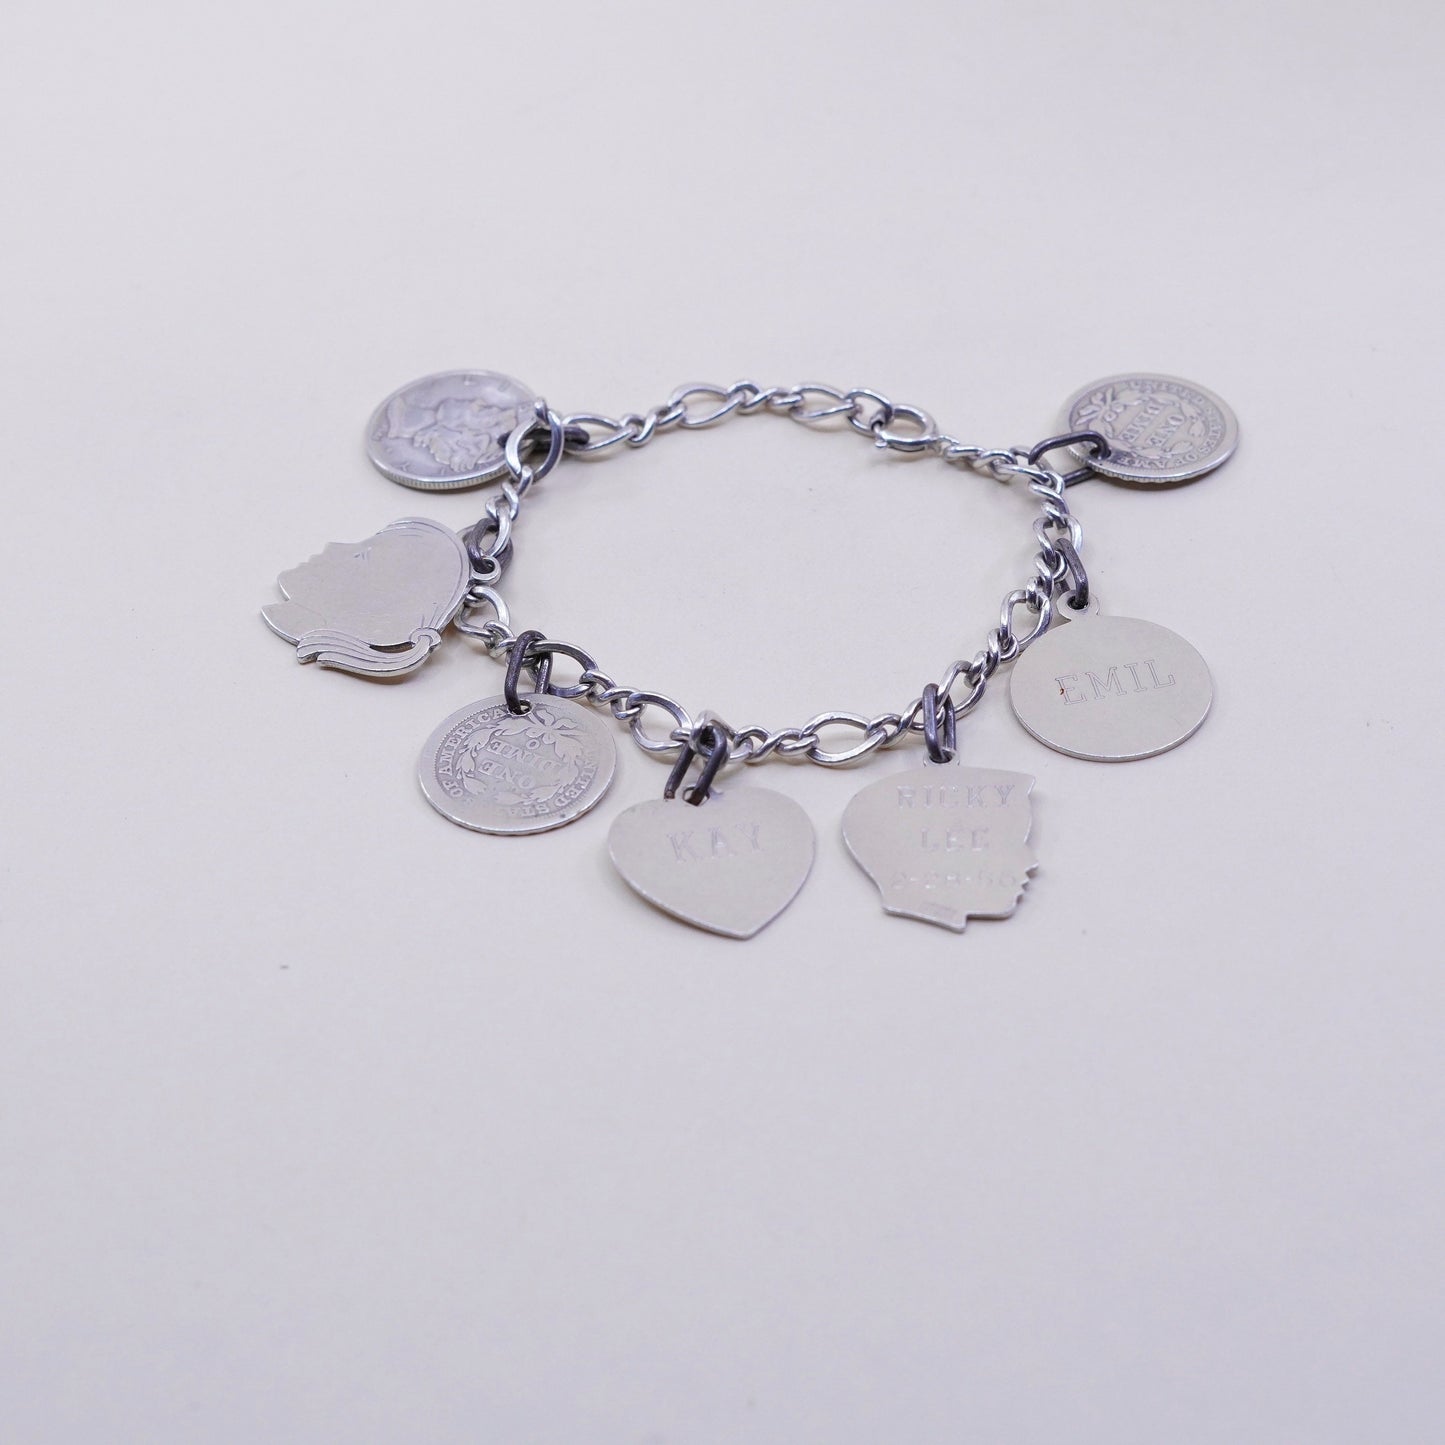 7”, sterling silver handmade bracelet, 925 Figaro chain w/ coin charms names